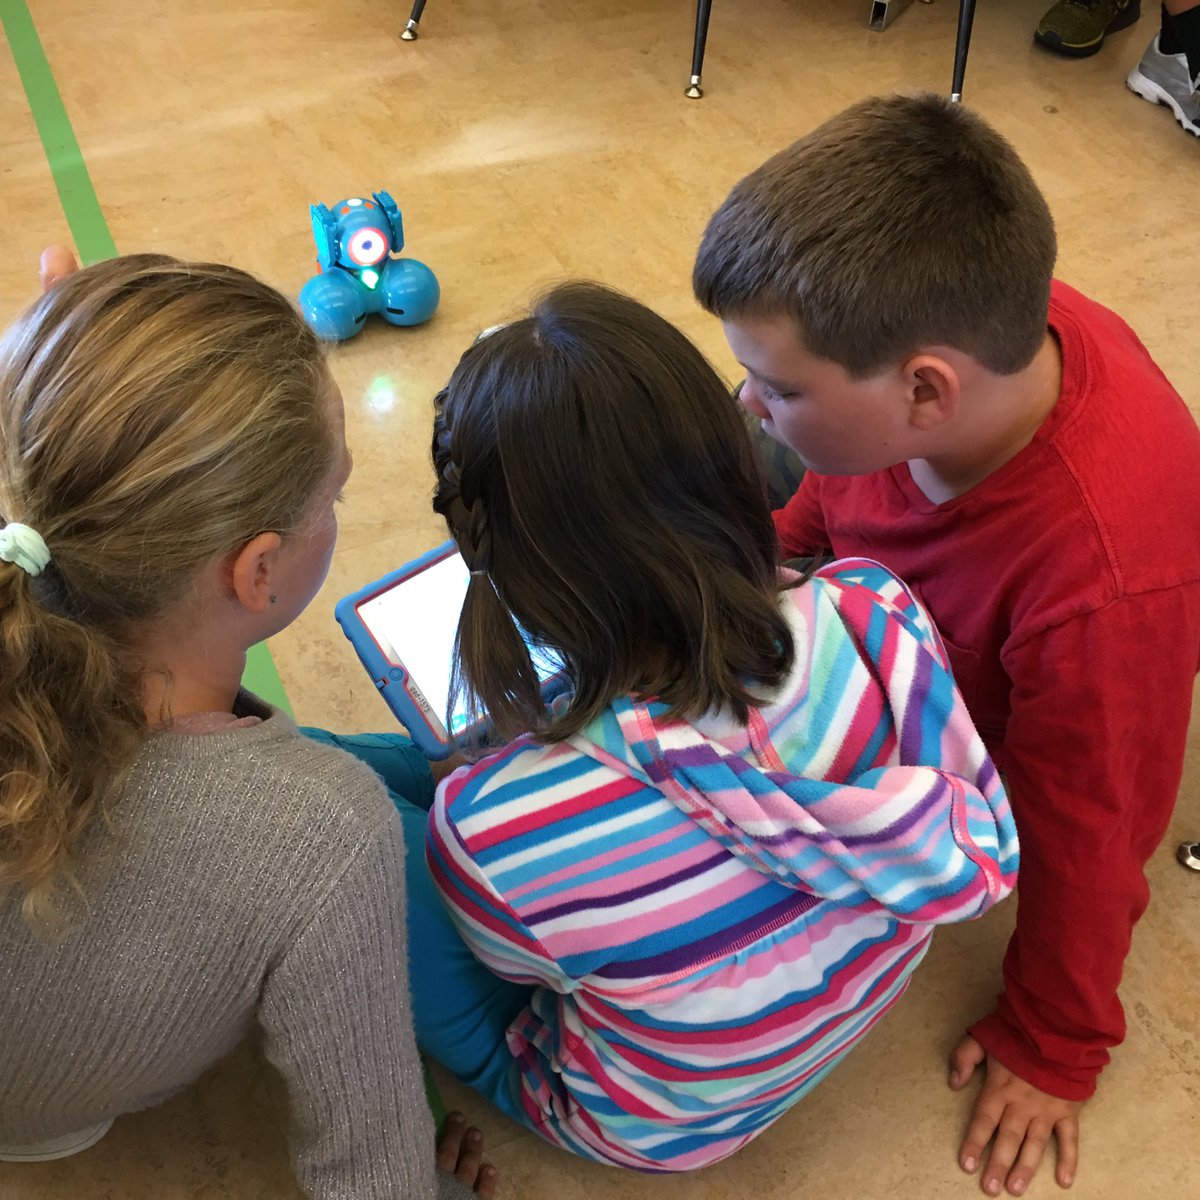 Partner Programming or Collaborative Coding? Either way, I love seeing these 4th graders solve #DashRobot puzzles with #blockly coding. @WonderWorkshop